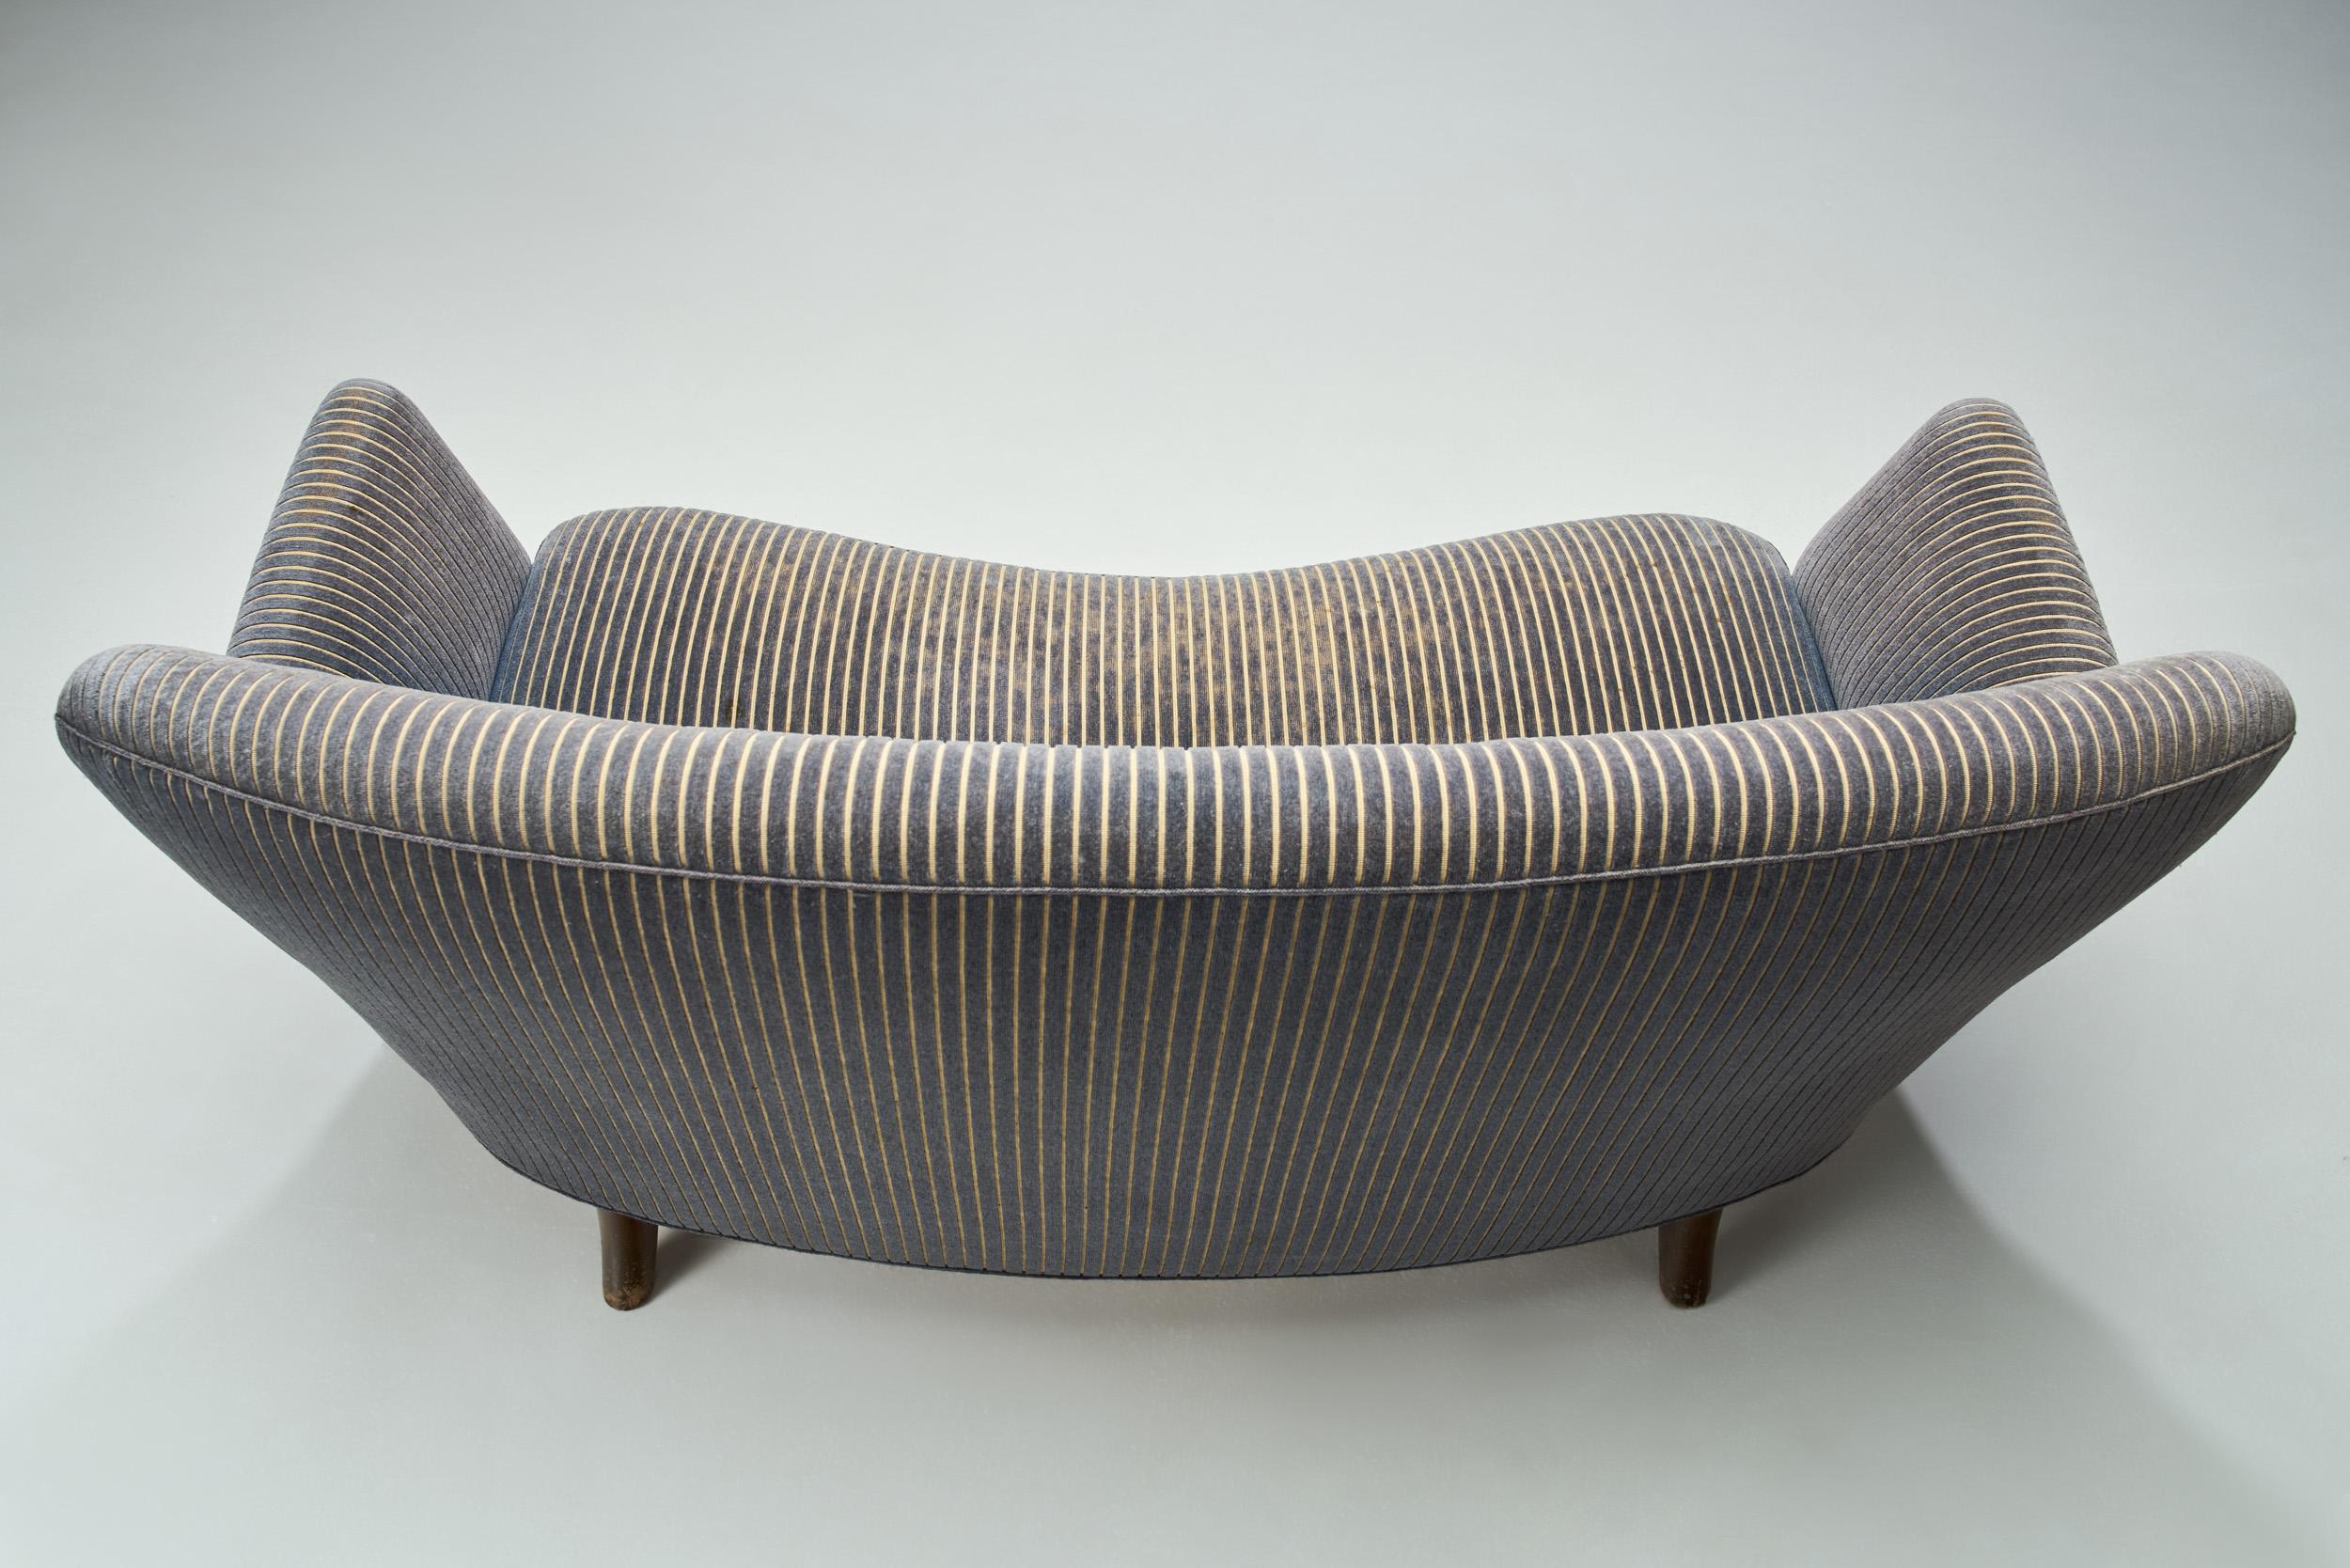 Fabric Danish Cabinetmaker Two-Seater Sofa with Striped Upholstery, Denmark 1940s For Sale